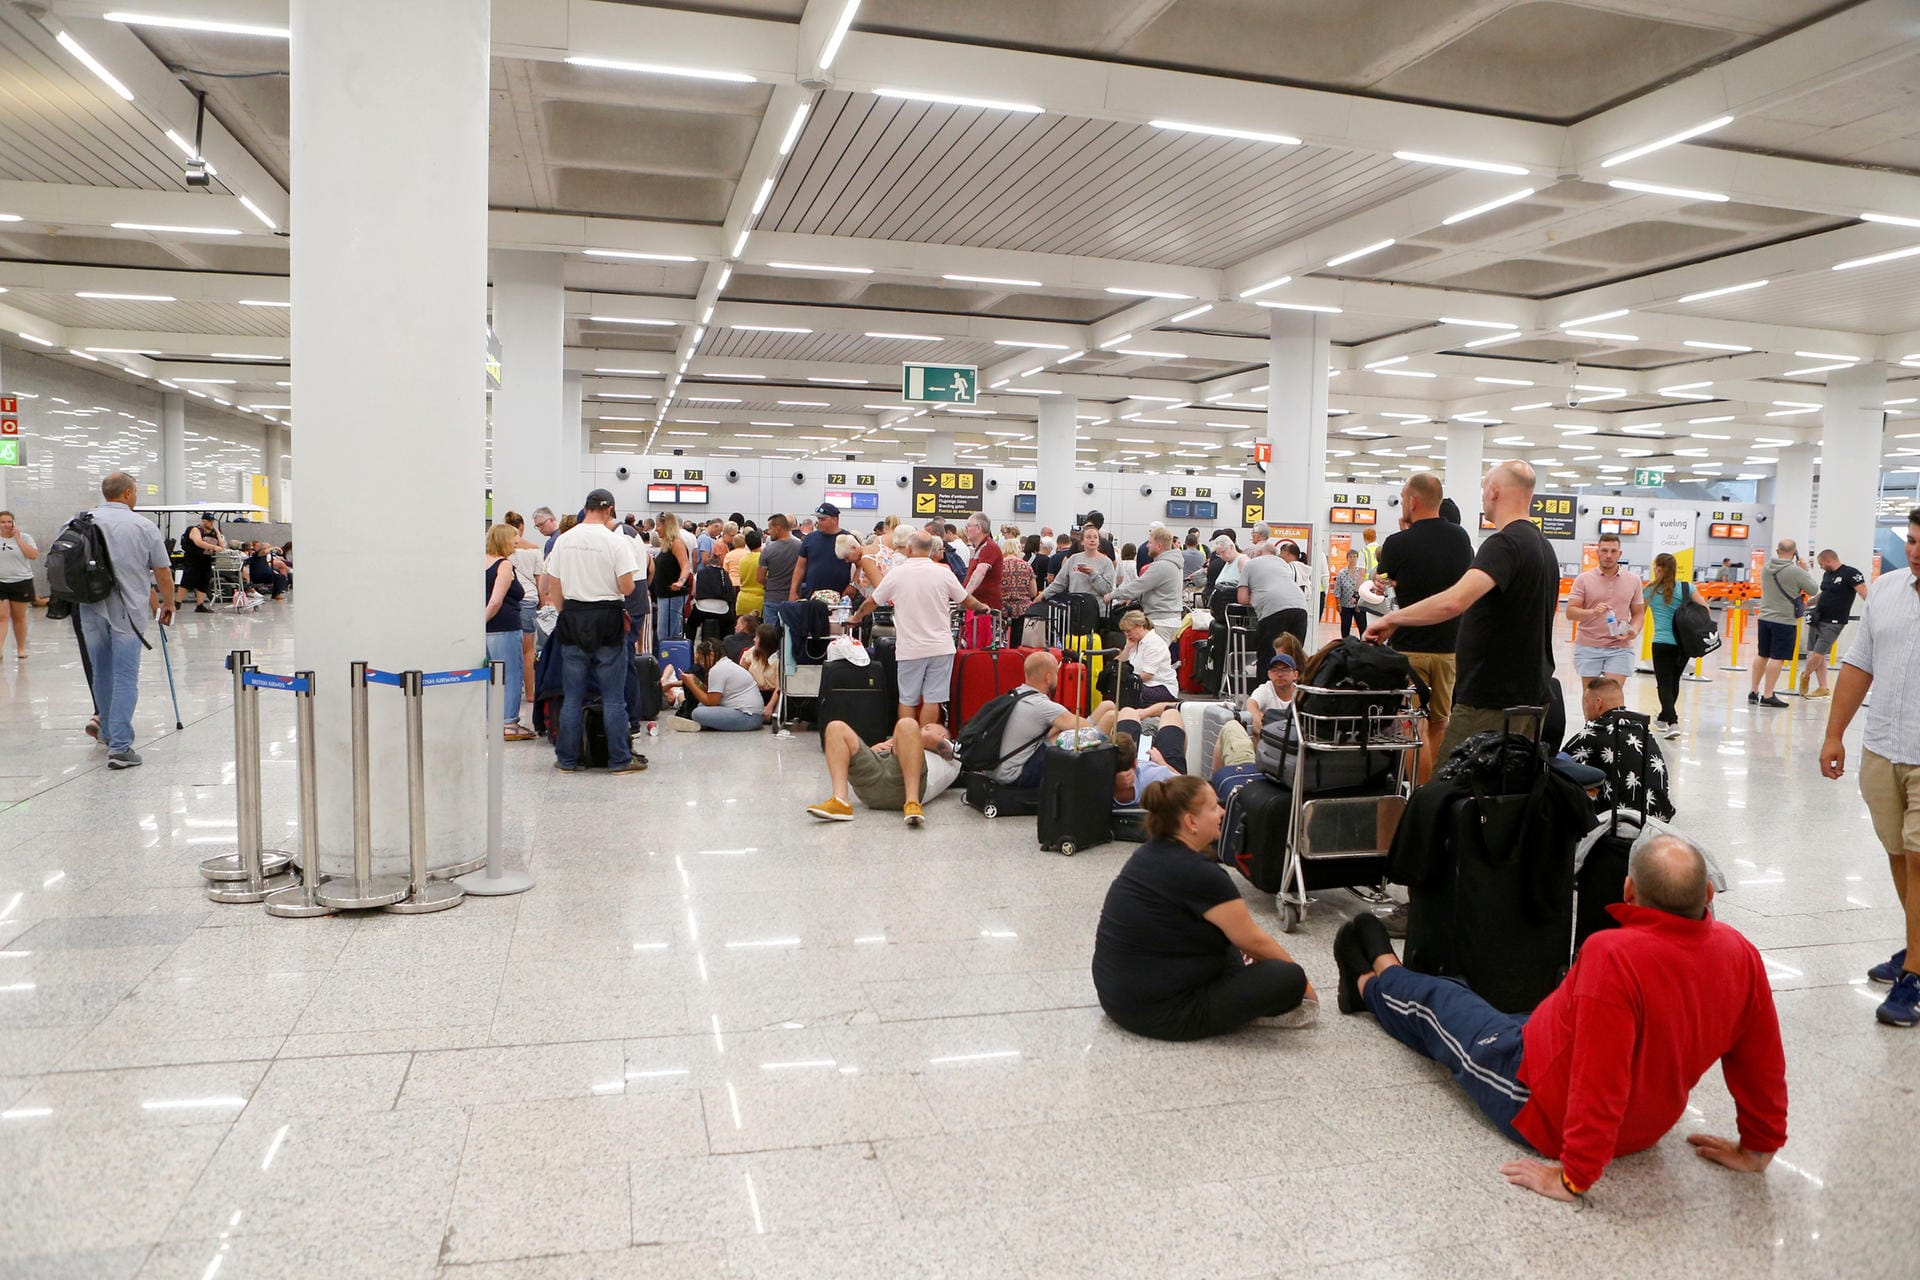 Passengers are seen at Thomas Cook check-in points at Mallorca Airport after the world's oldest travel firm collapsed, in Palma de Mallorca